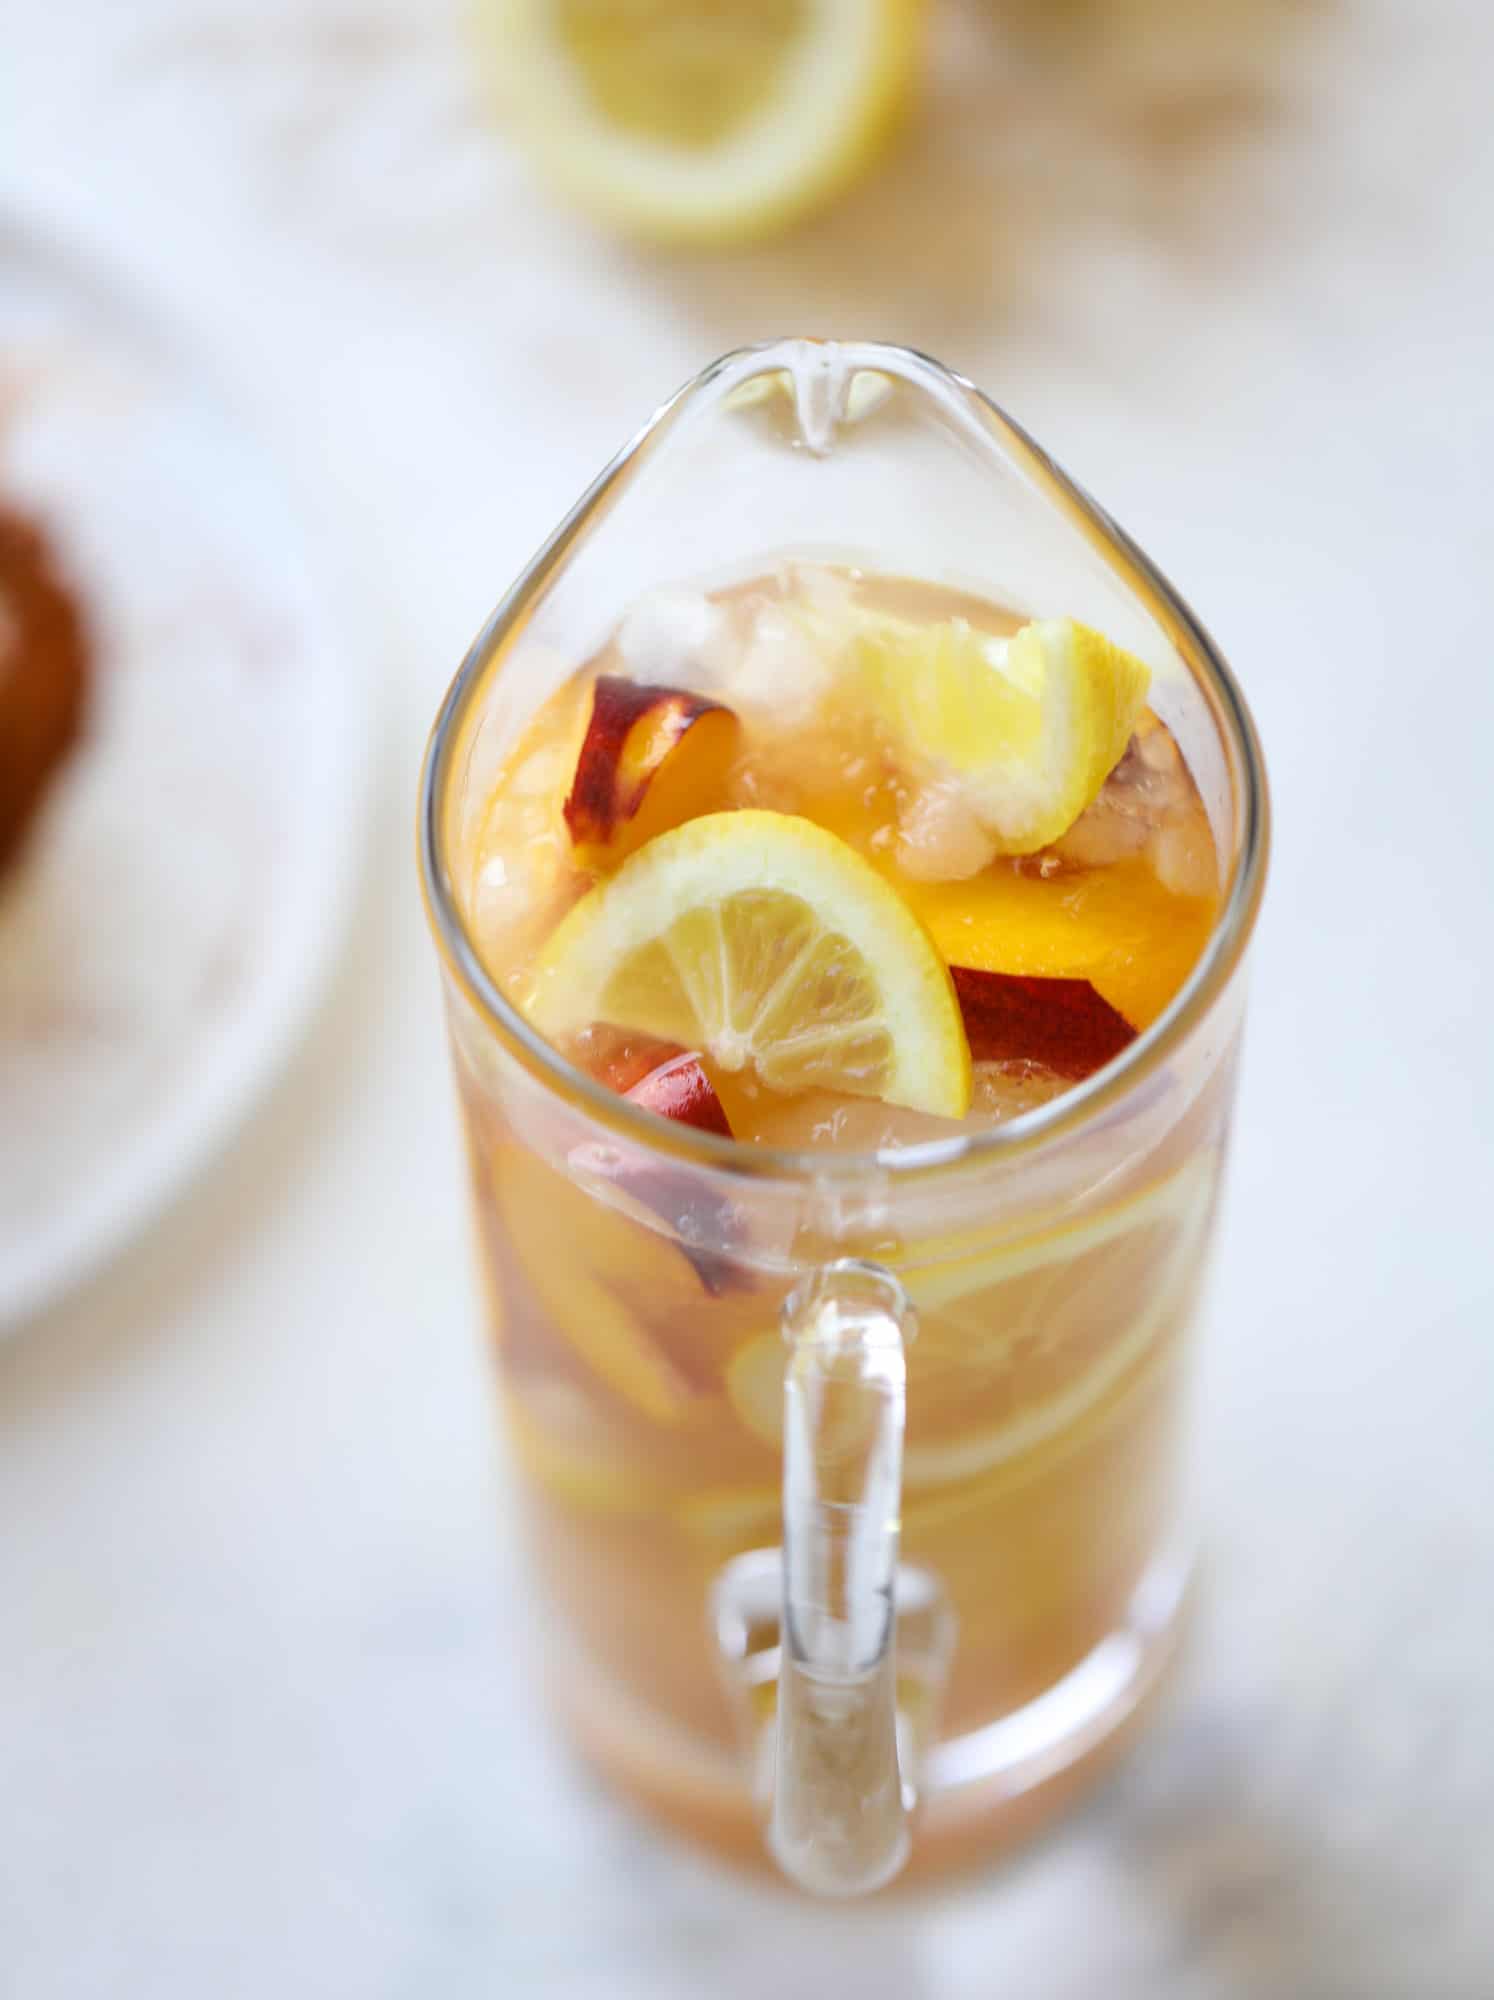 This peach lemonade is super refreshing and a bit spicy for a hot and sunny summer day. It's sweet and fresh and the rim is dipped in a cajun seasoning, bringing the best bite of heat to this perfect summer drink. So fresh! I howsweeteats.com #peach #lemonade #cajun #summer #mocktail #lemon #drink